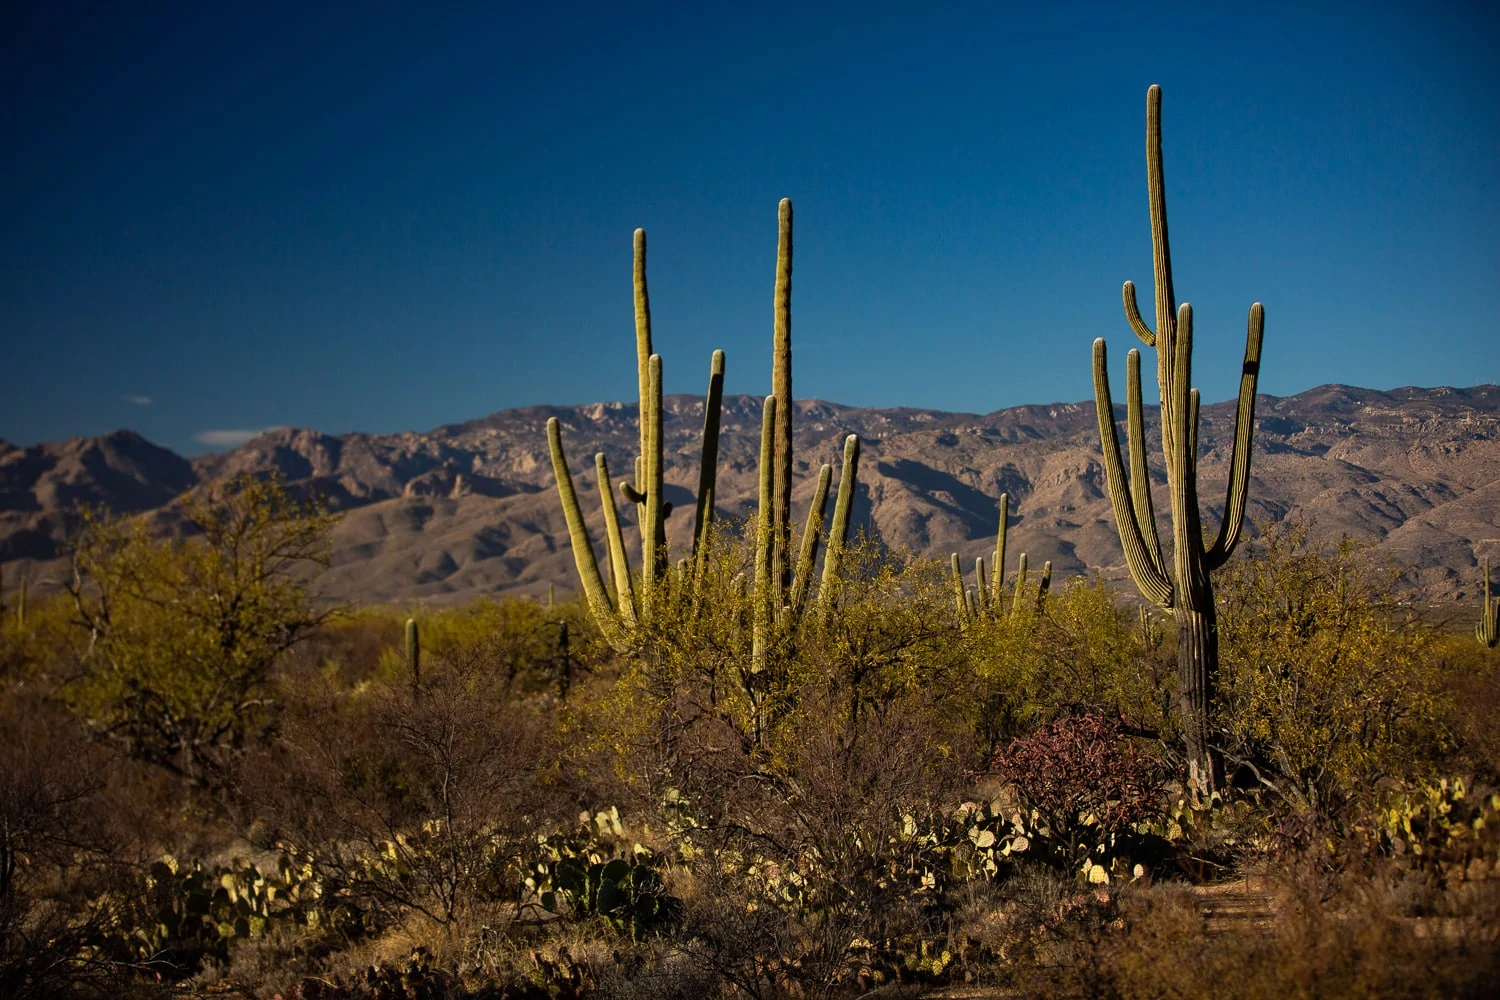 East Saguaro national park view of the rincon mountains behind several tall saguaros